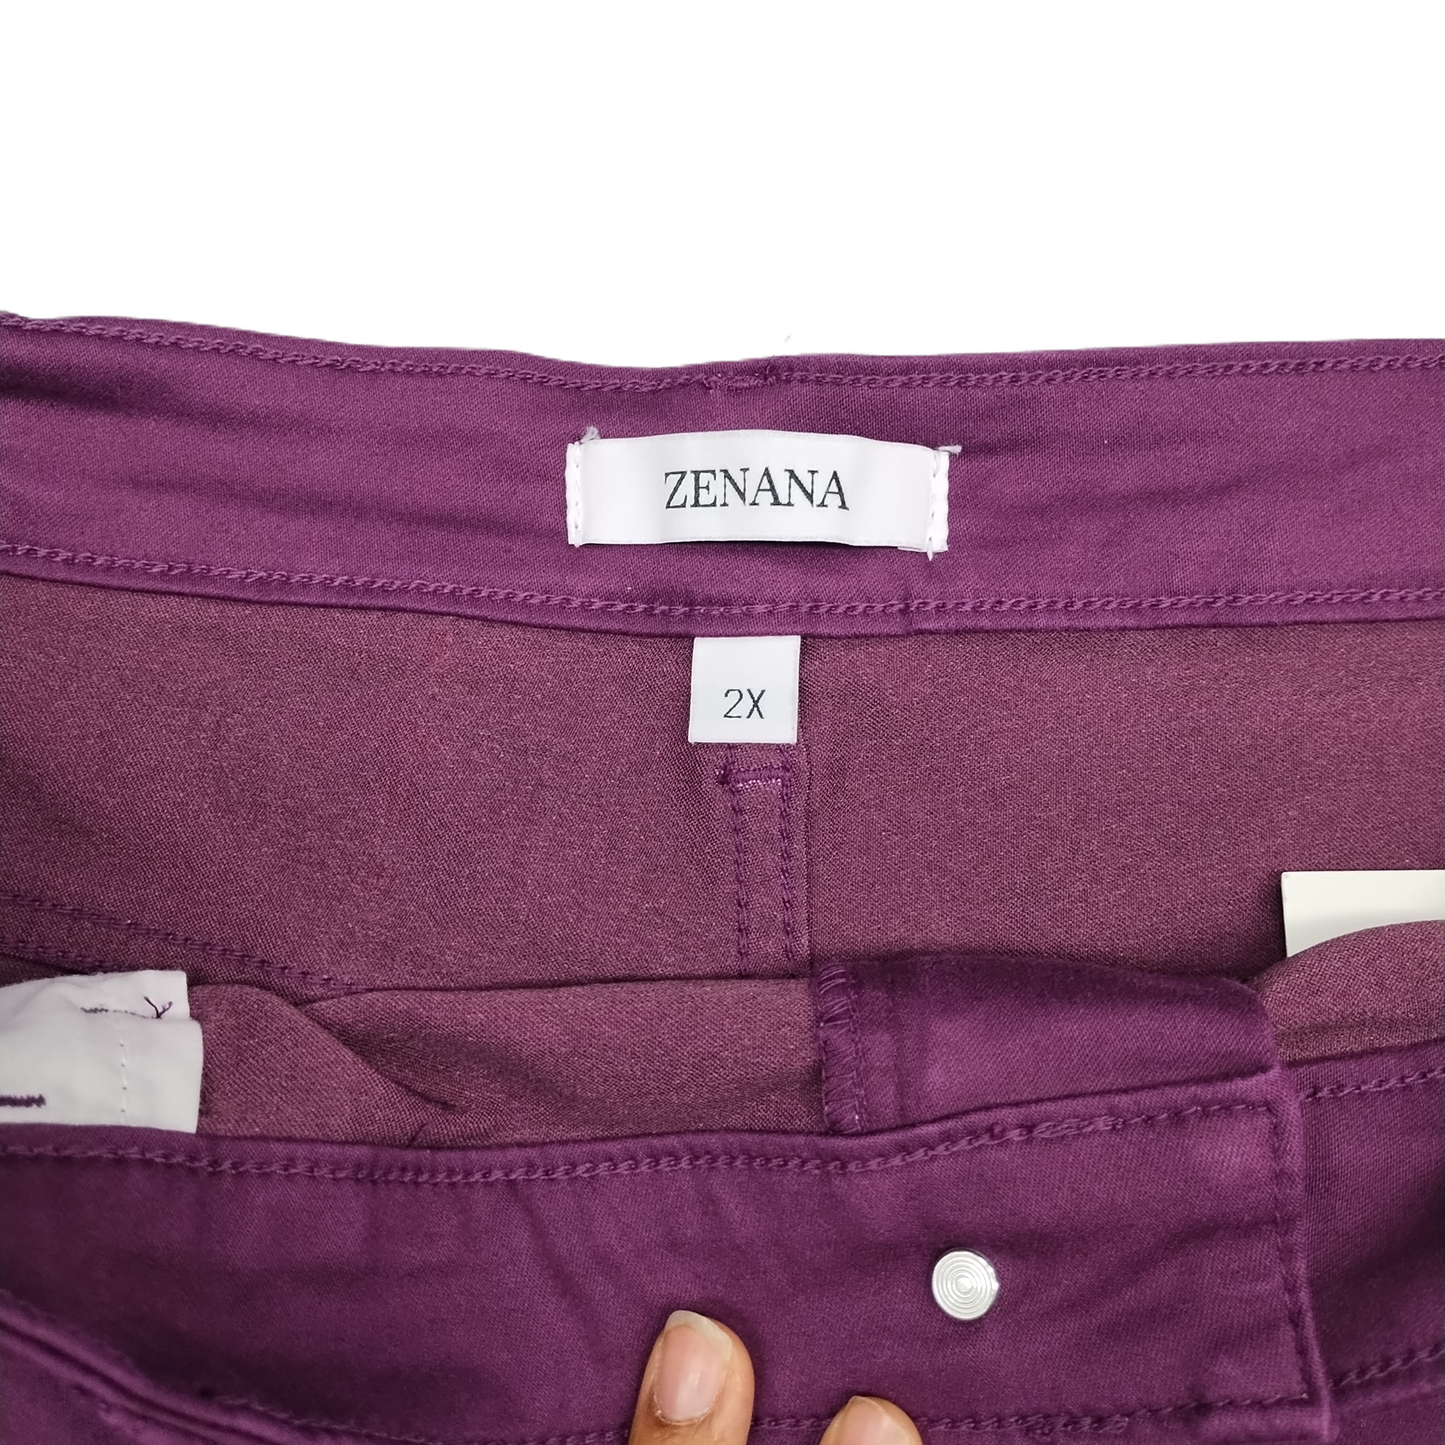 Shorts By Zenana Outfitters  Size: 2x